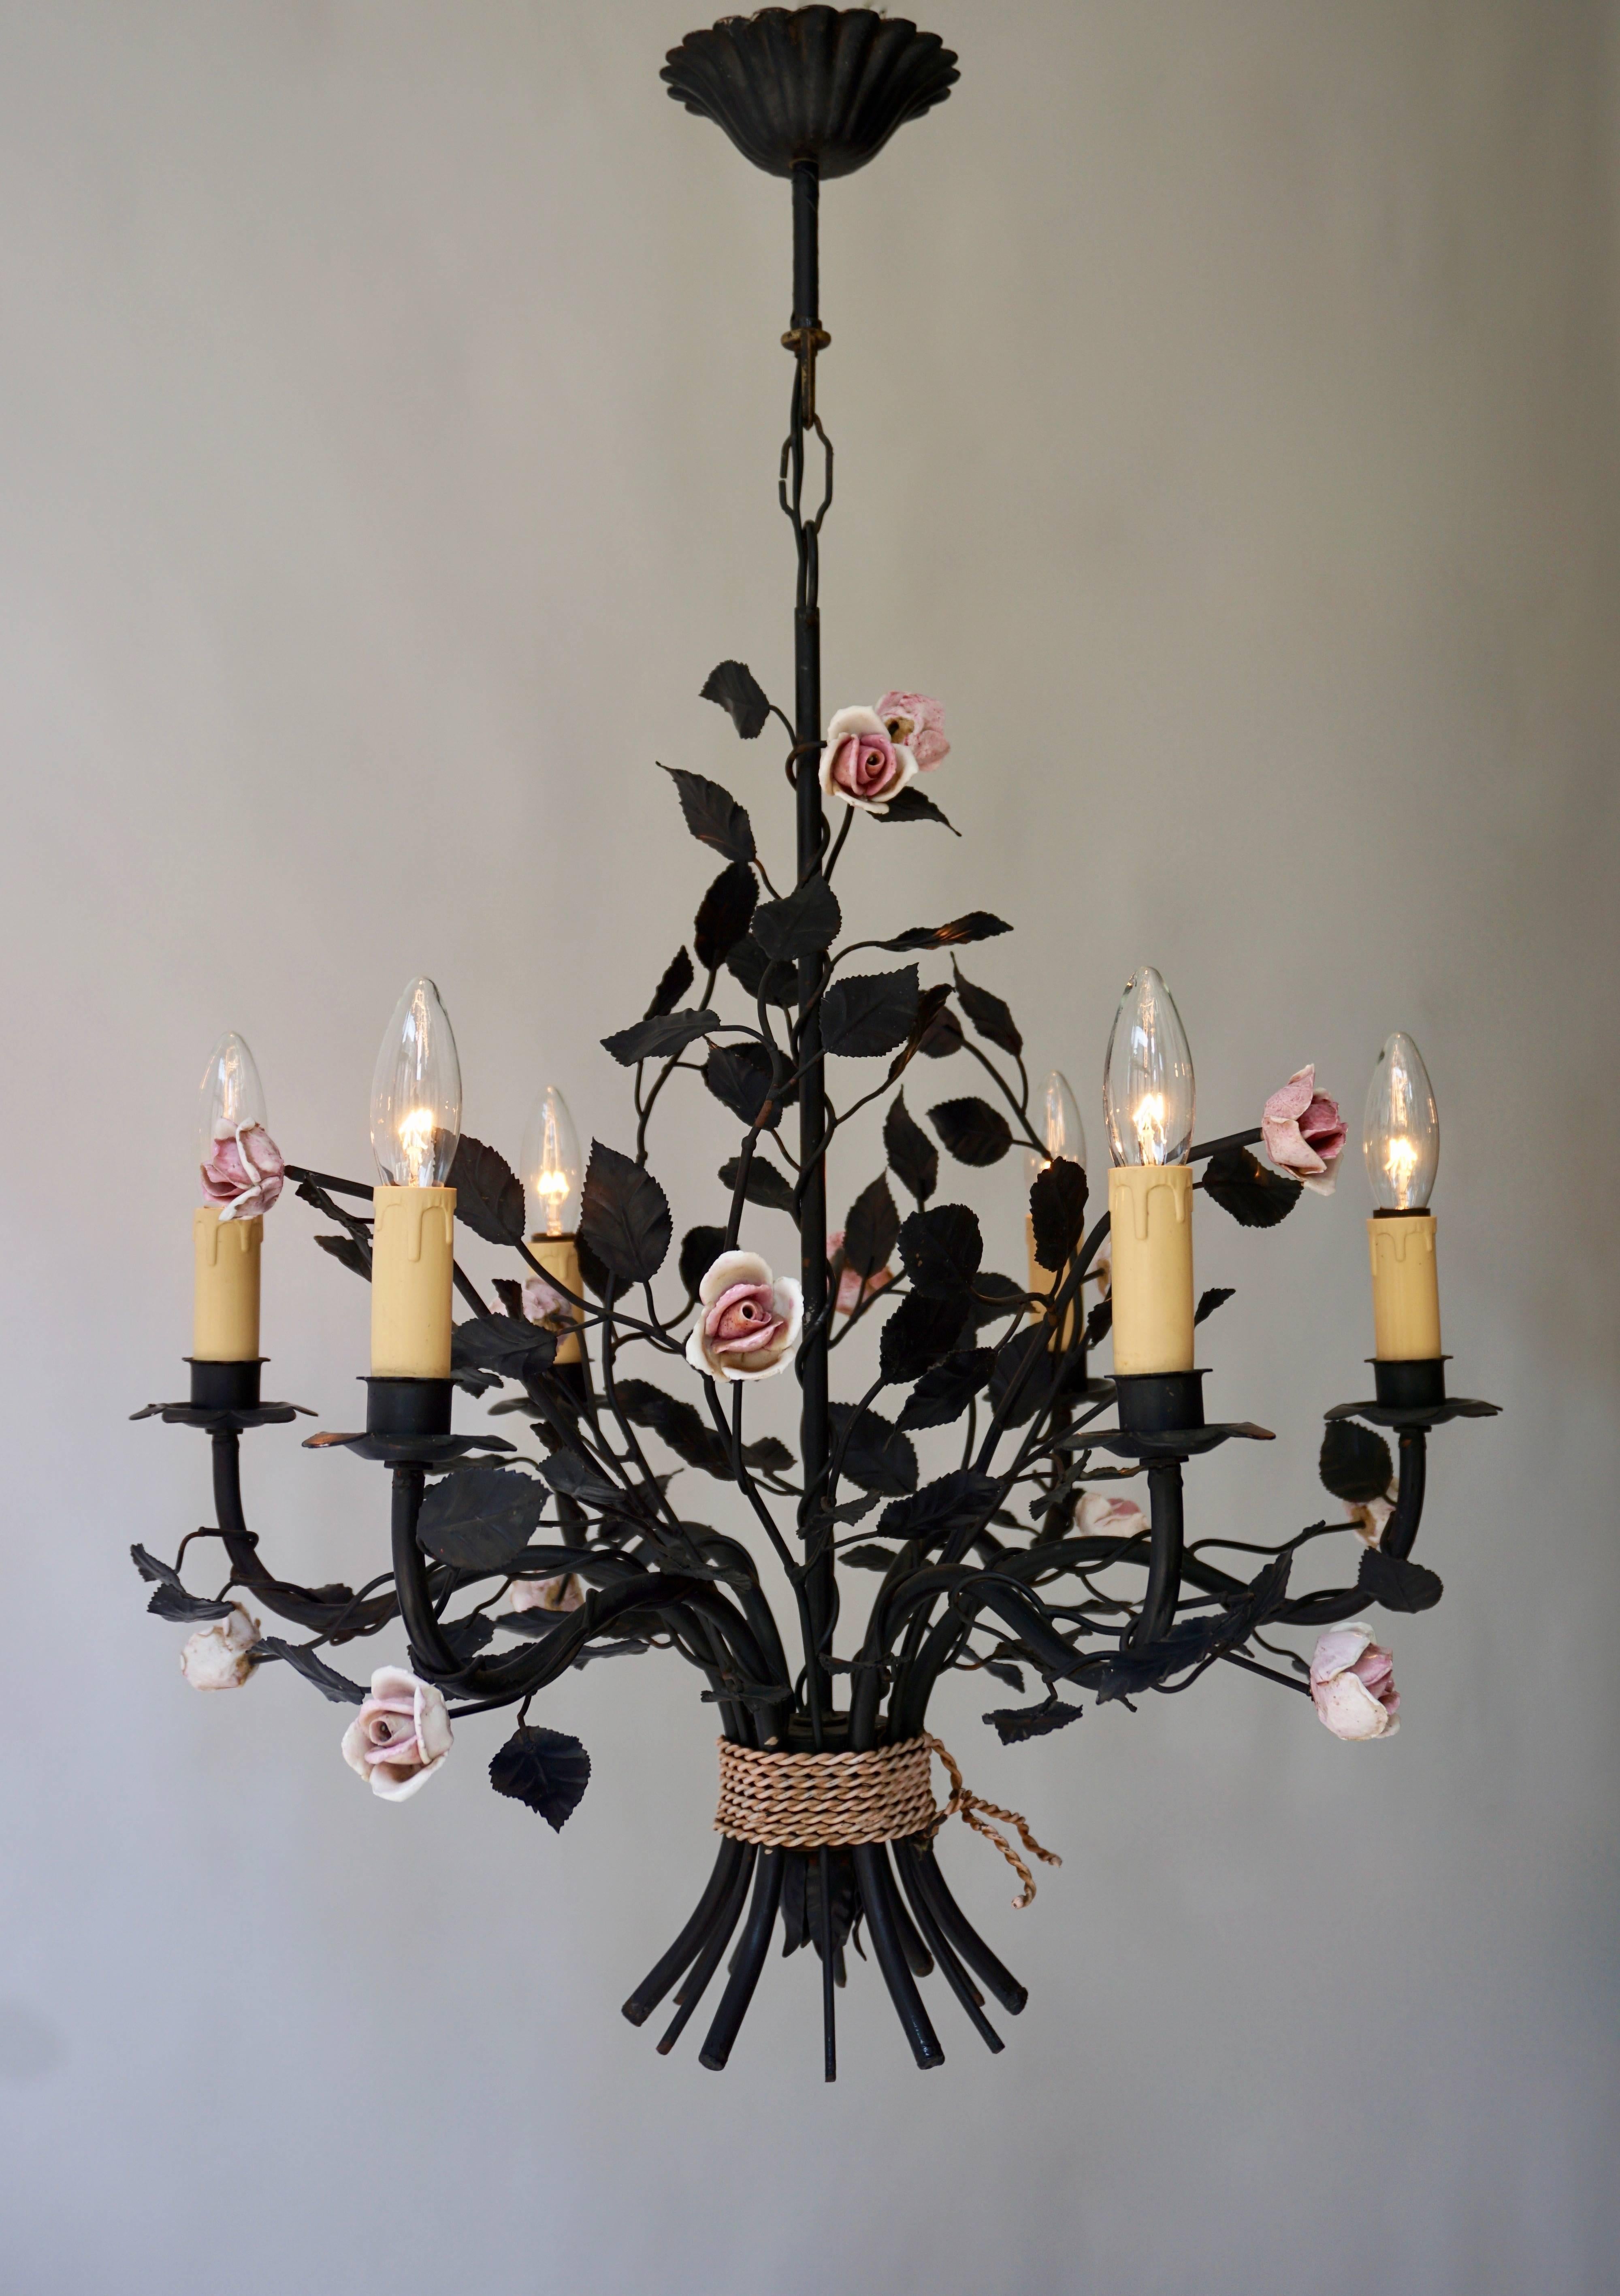 Italian chandelier with porcelain flowers.
The light requires six single E14 screw fit lightbulbs (60Watt max.) LED compatible.

Measures: 
Diameter 57 cm.
Height fixture 60 cm.
Total height with the chain 80 cm.